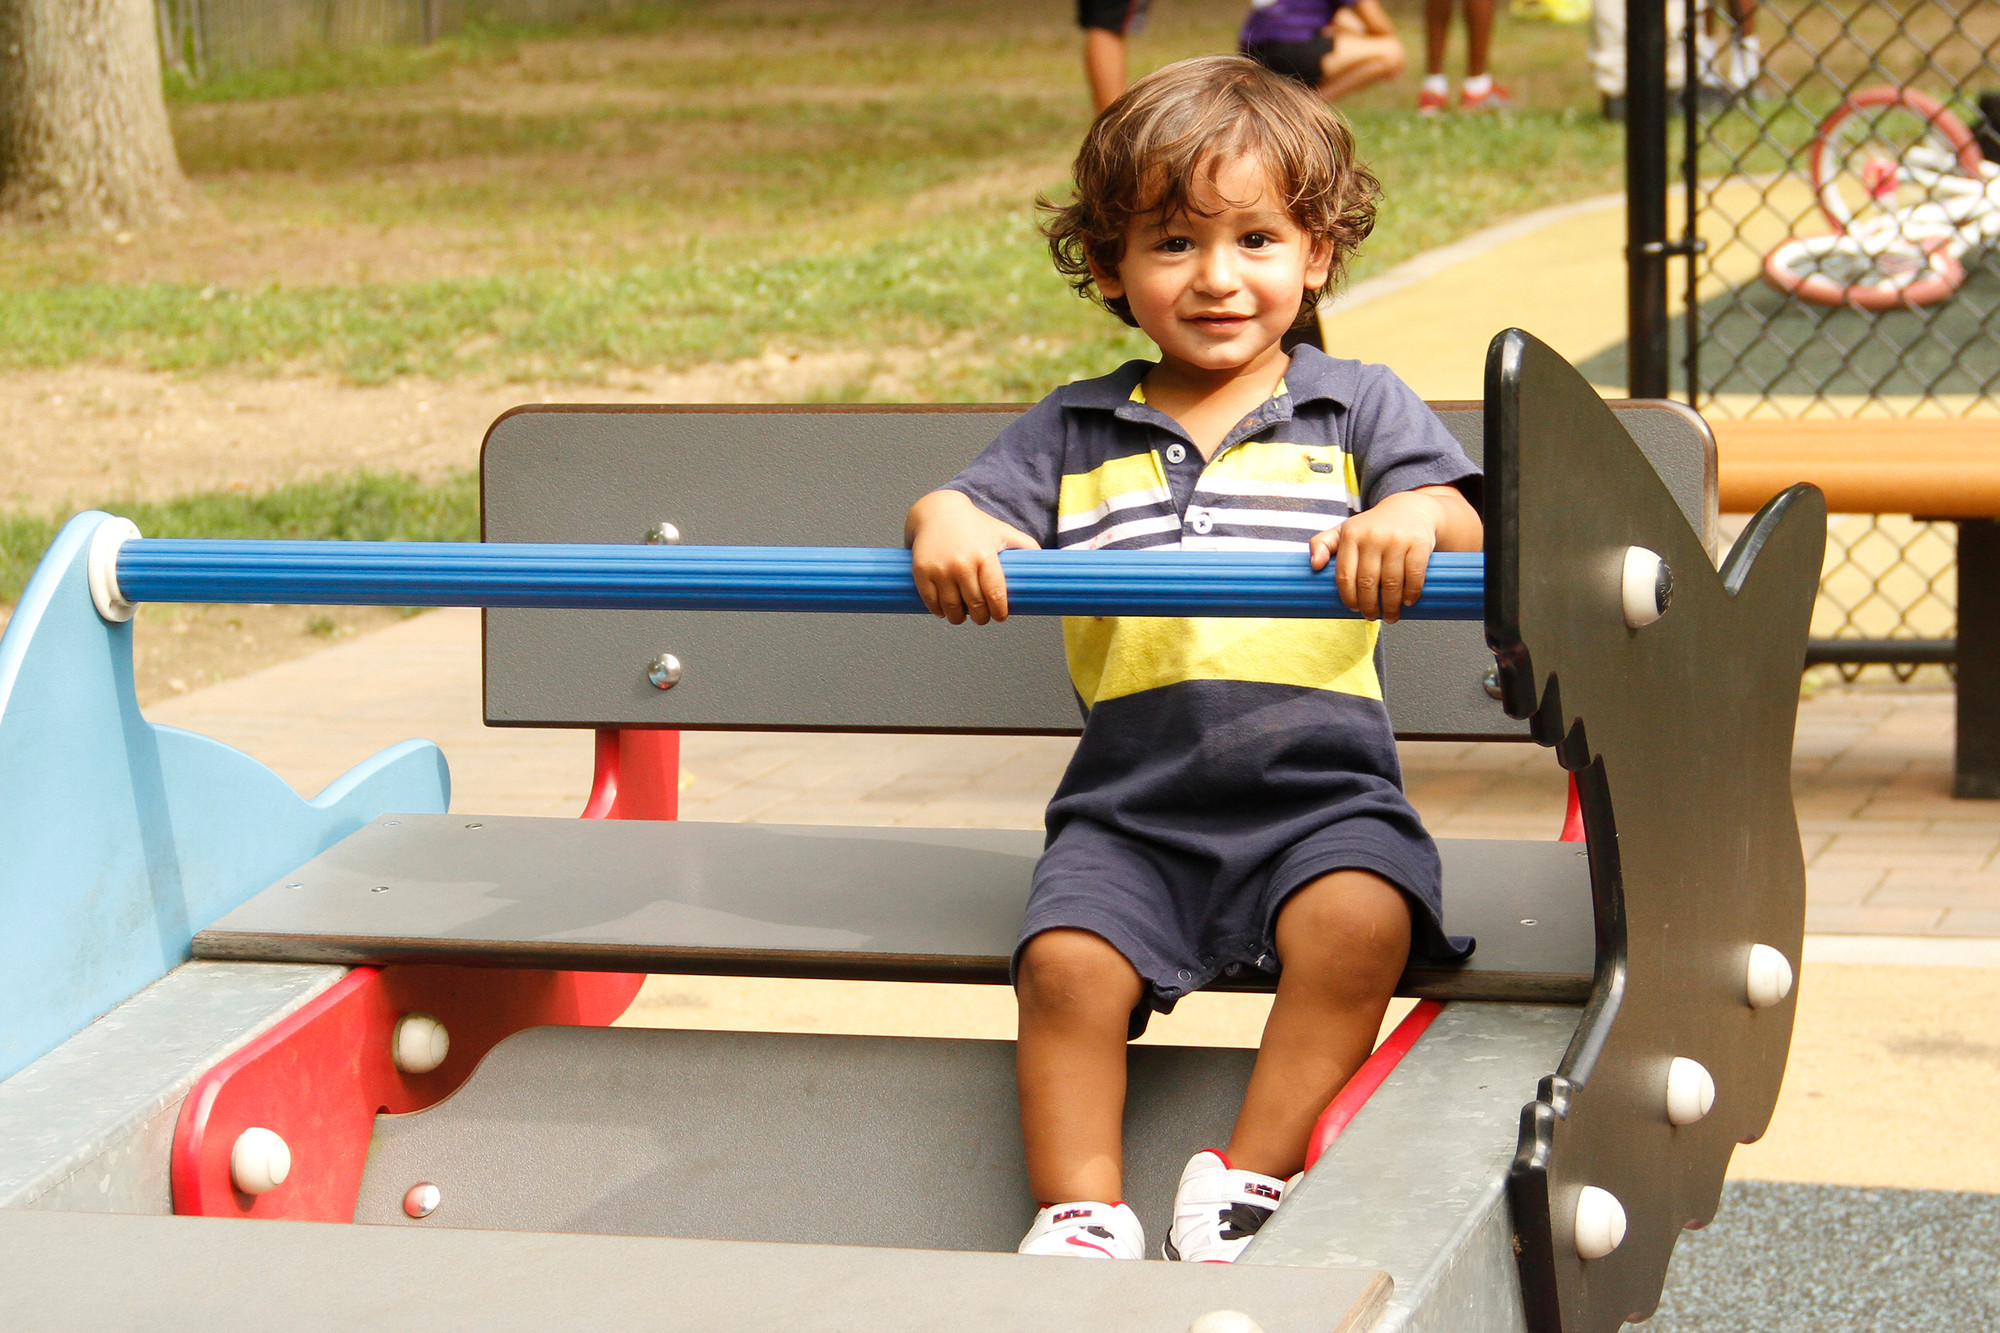 Jorge Escobar, 3, held tight to an adjustable entrance lever on one of the playground’s rides.